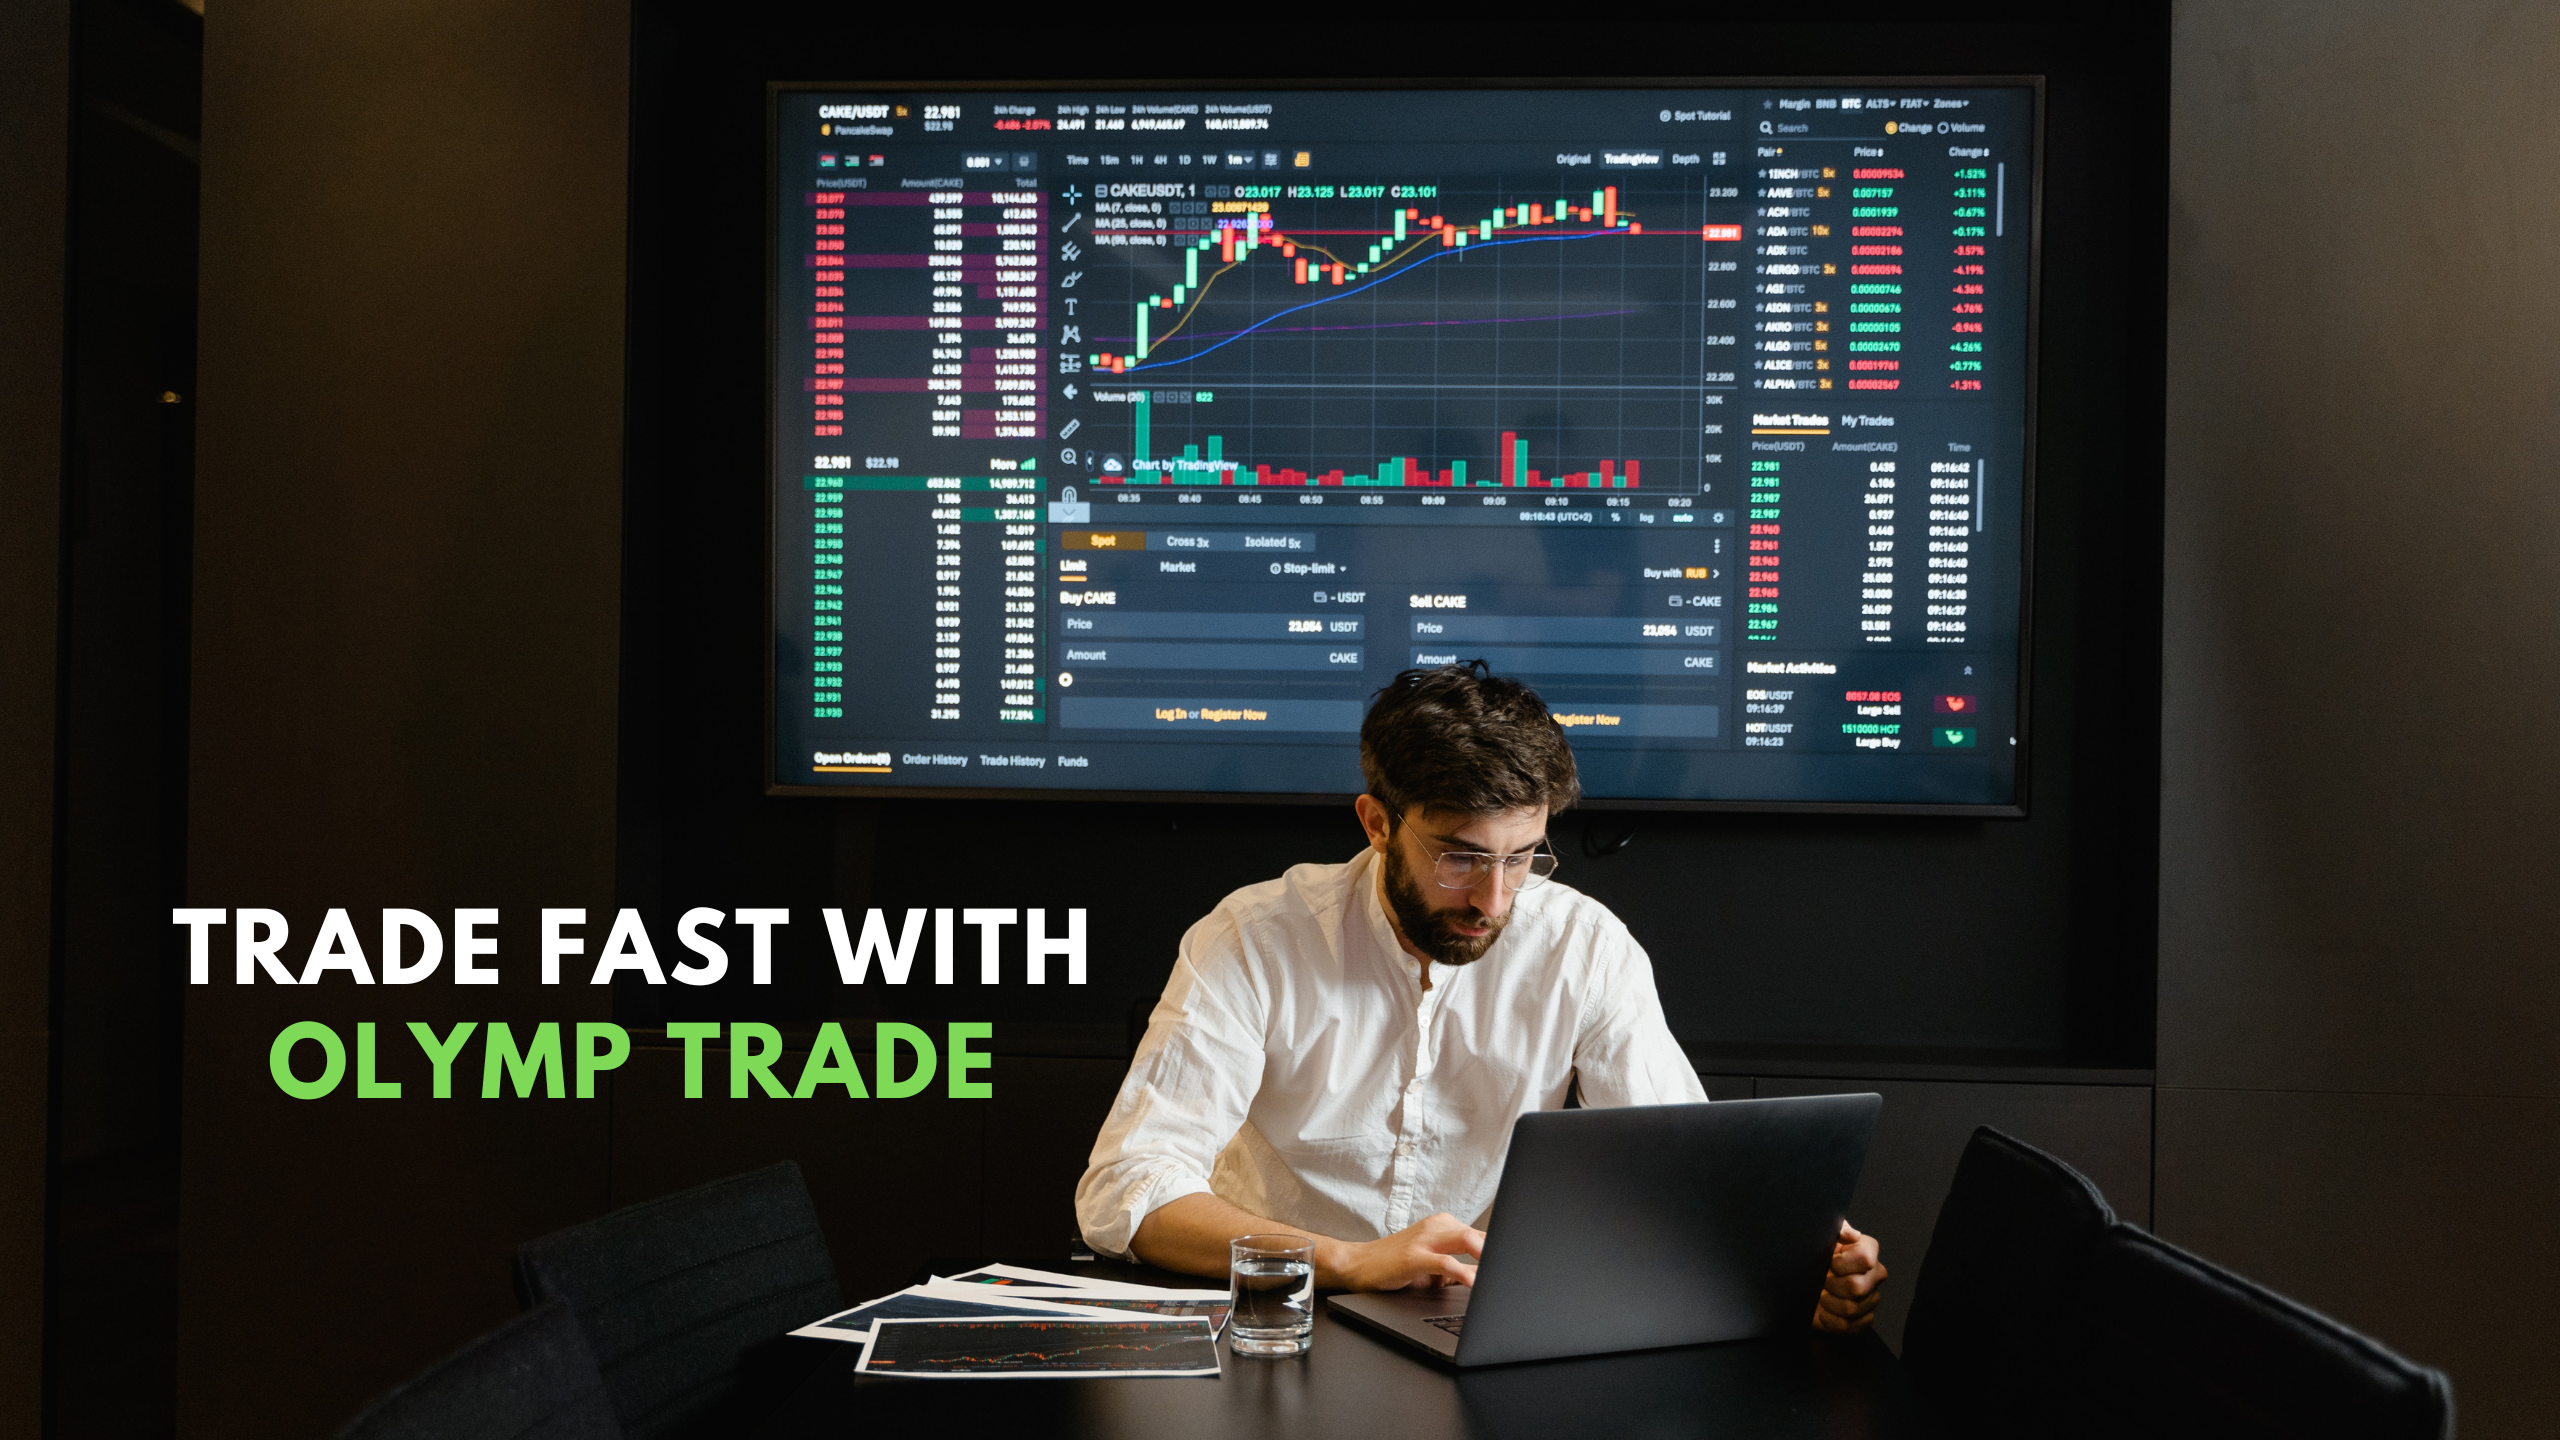 Use this easy strategy to place 5 secs trades on Olymp trade Quickler